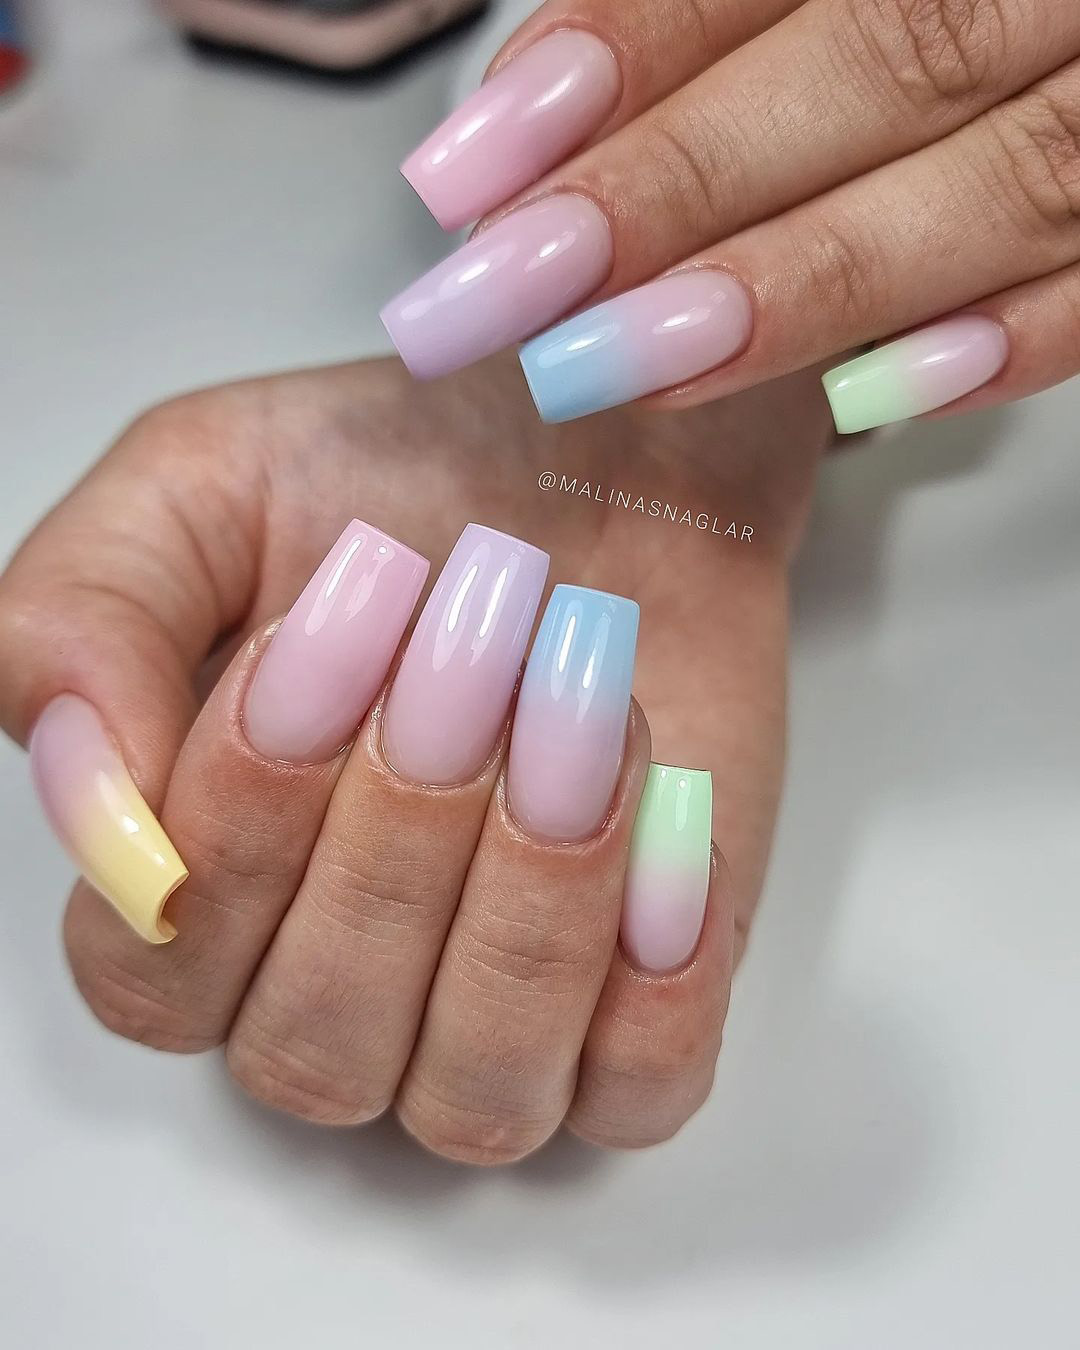 simple wedding nails long nude and colored ombre malinasnaglar